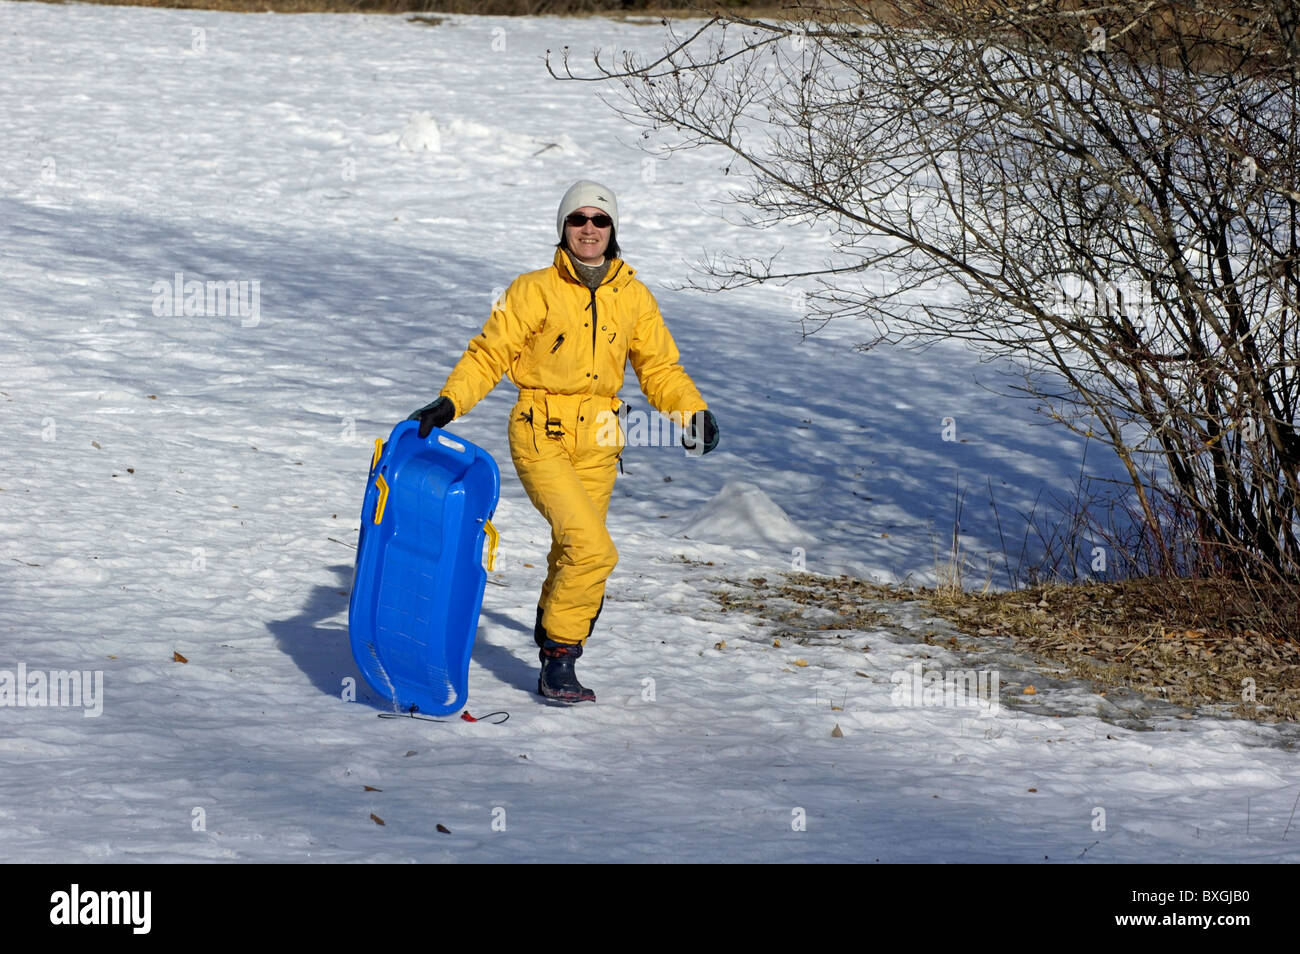 Woman carrying a sled along in the snow. Stock Photo